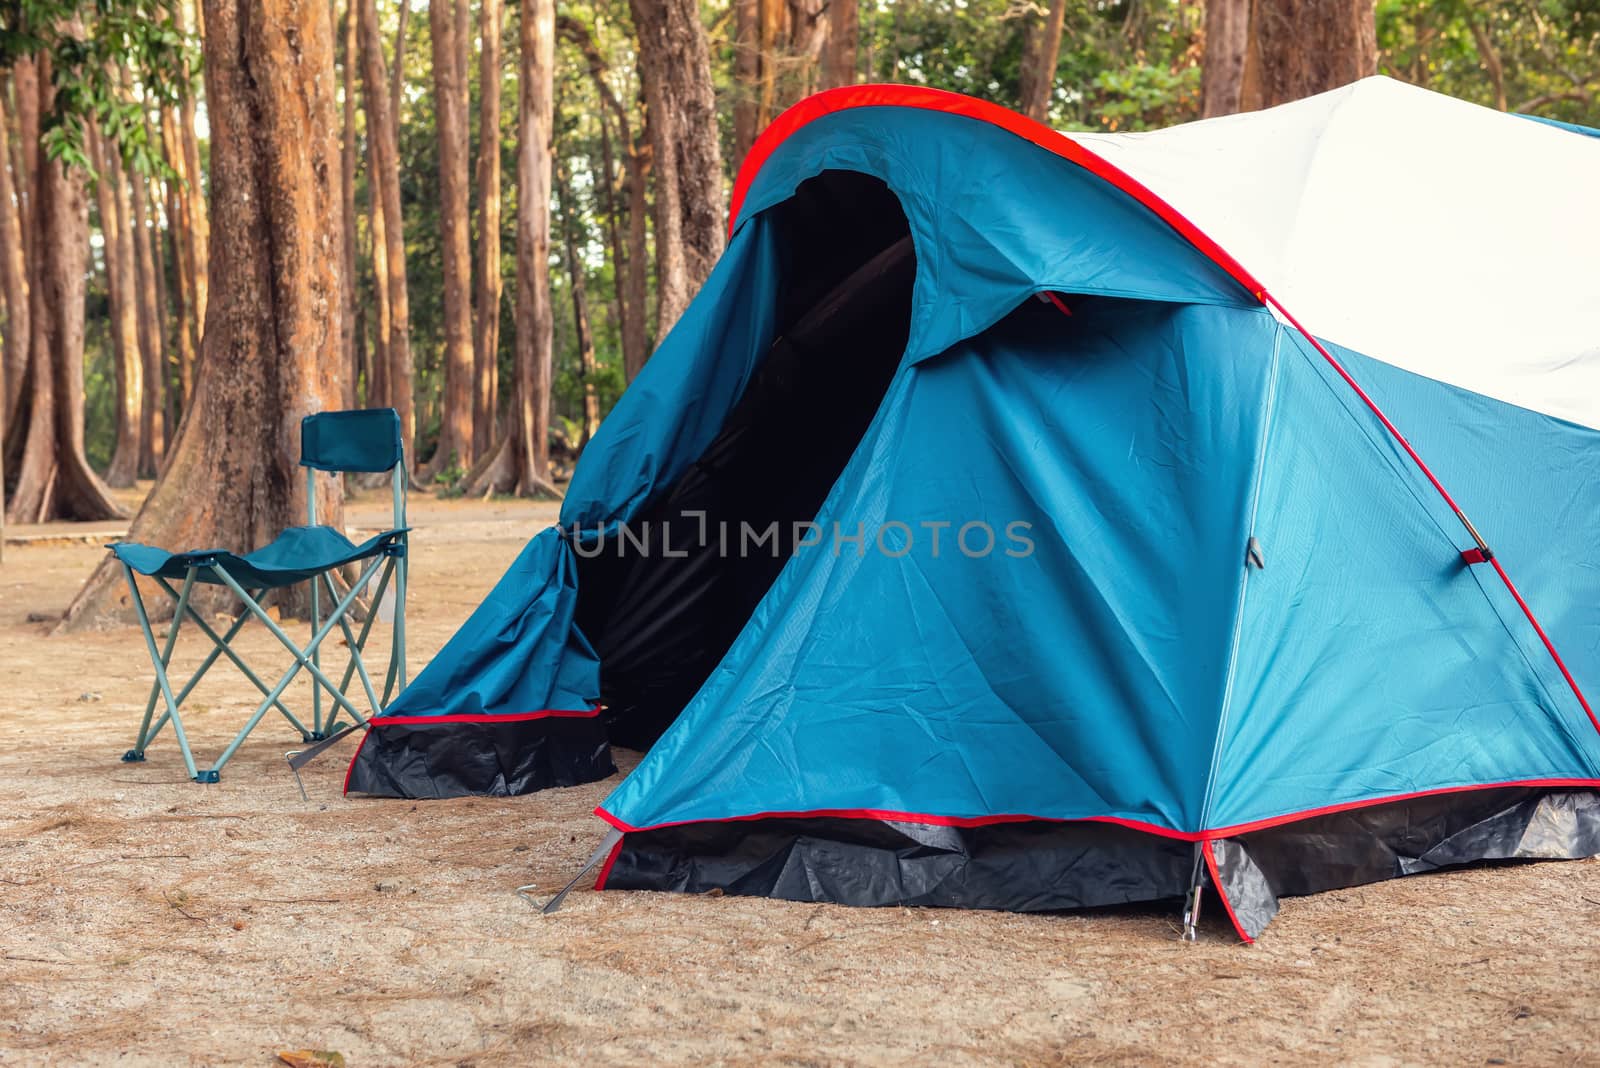 Campsite and Tent for Campfire in Holiday at National Park, Camping Site for Outdoors Leisure Activity Relaxation. Adventure and Vacation Lifestyles Concept by MahaHeang245789